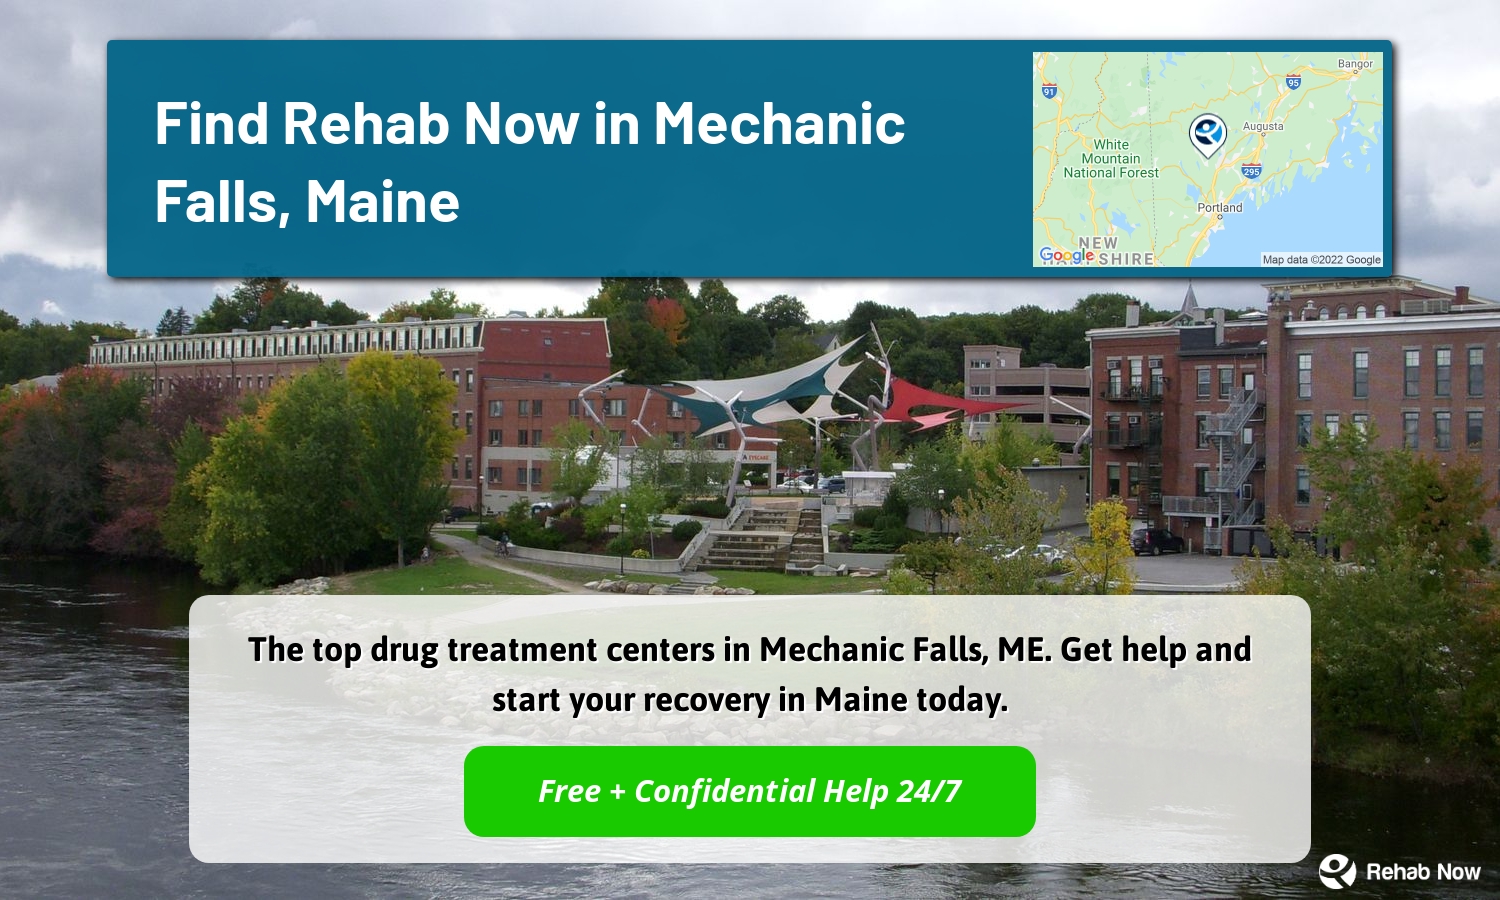 The top drug treatment centers in Mechanic Falls, ME. Get help and start your recovery in Maine today.